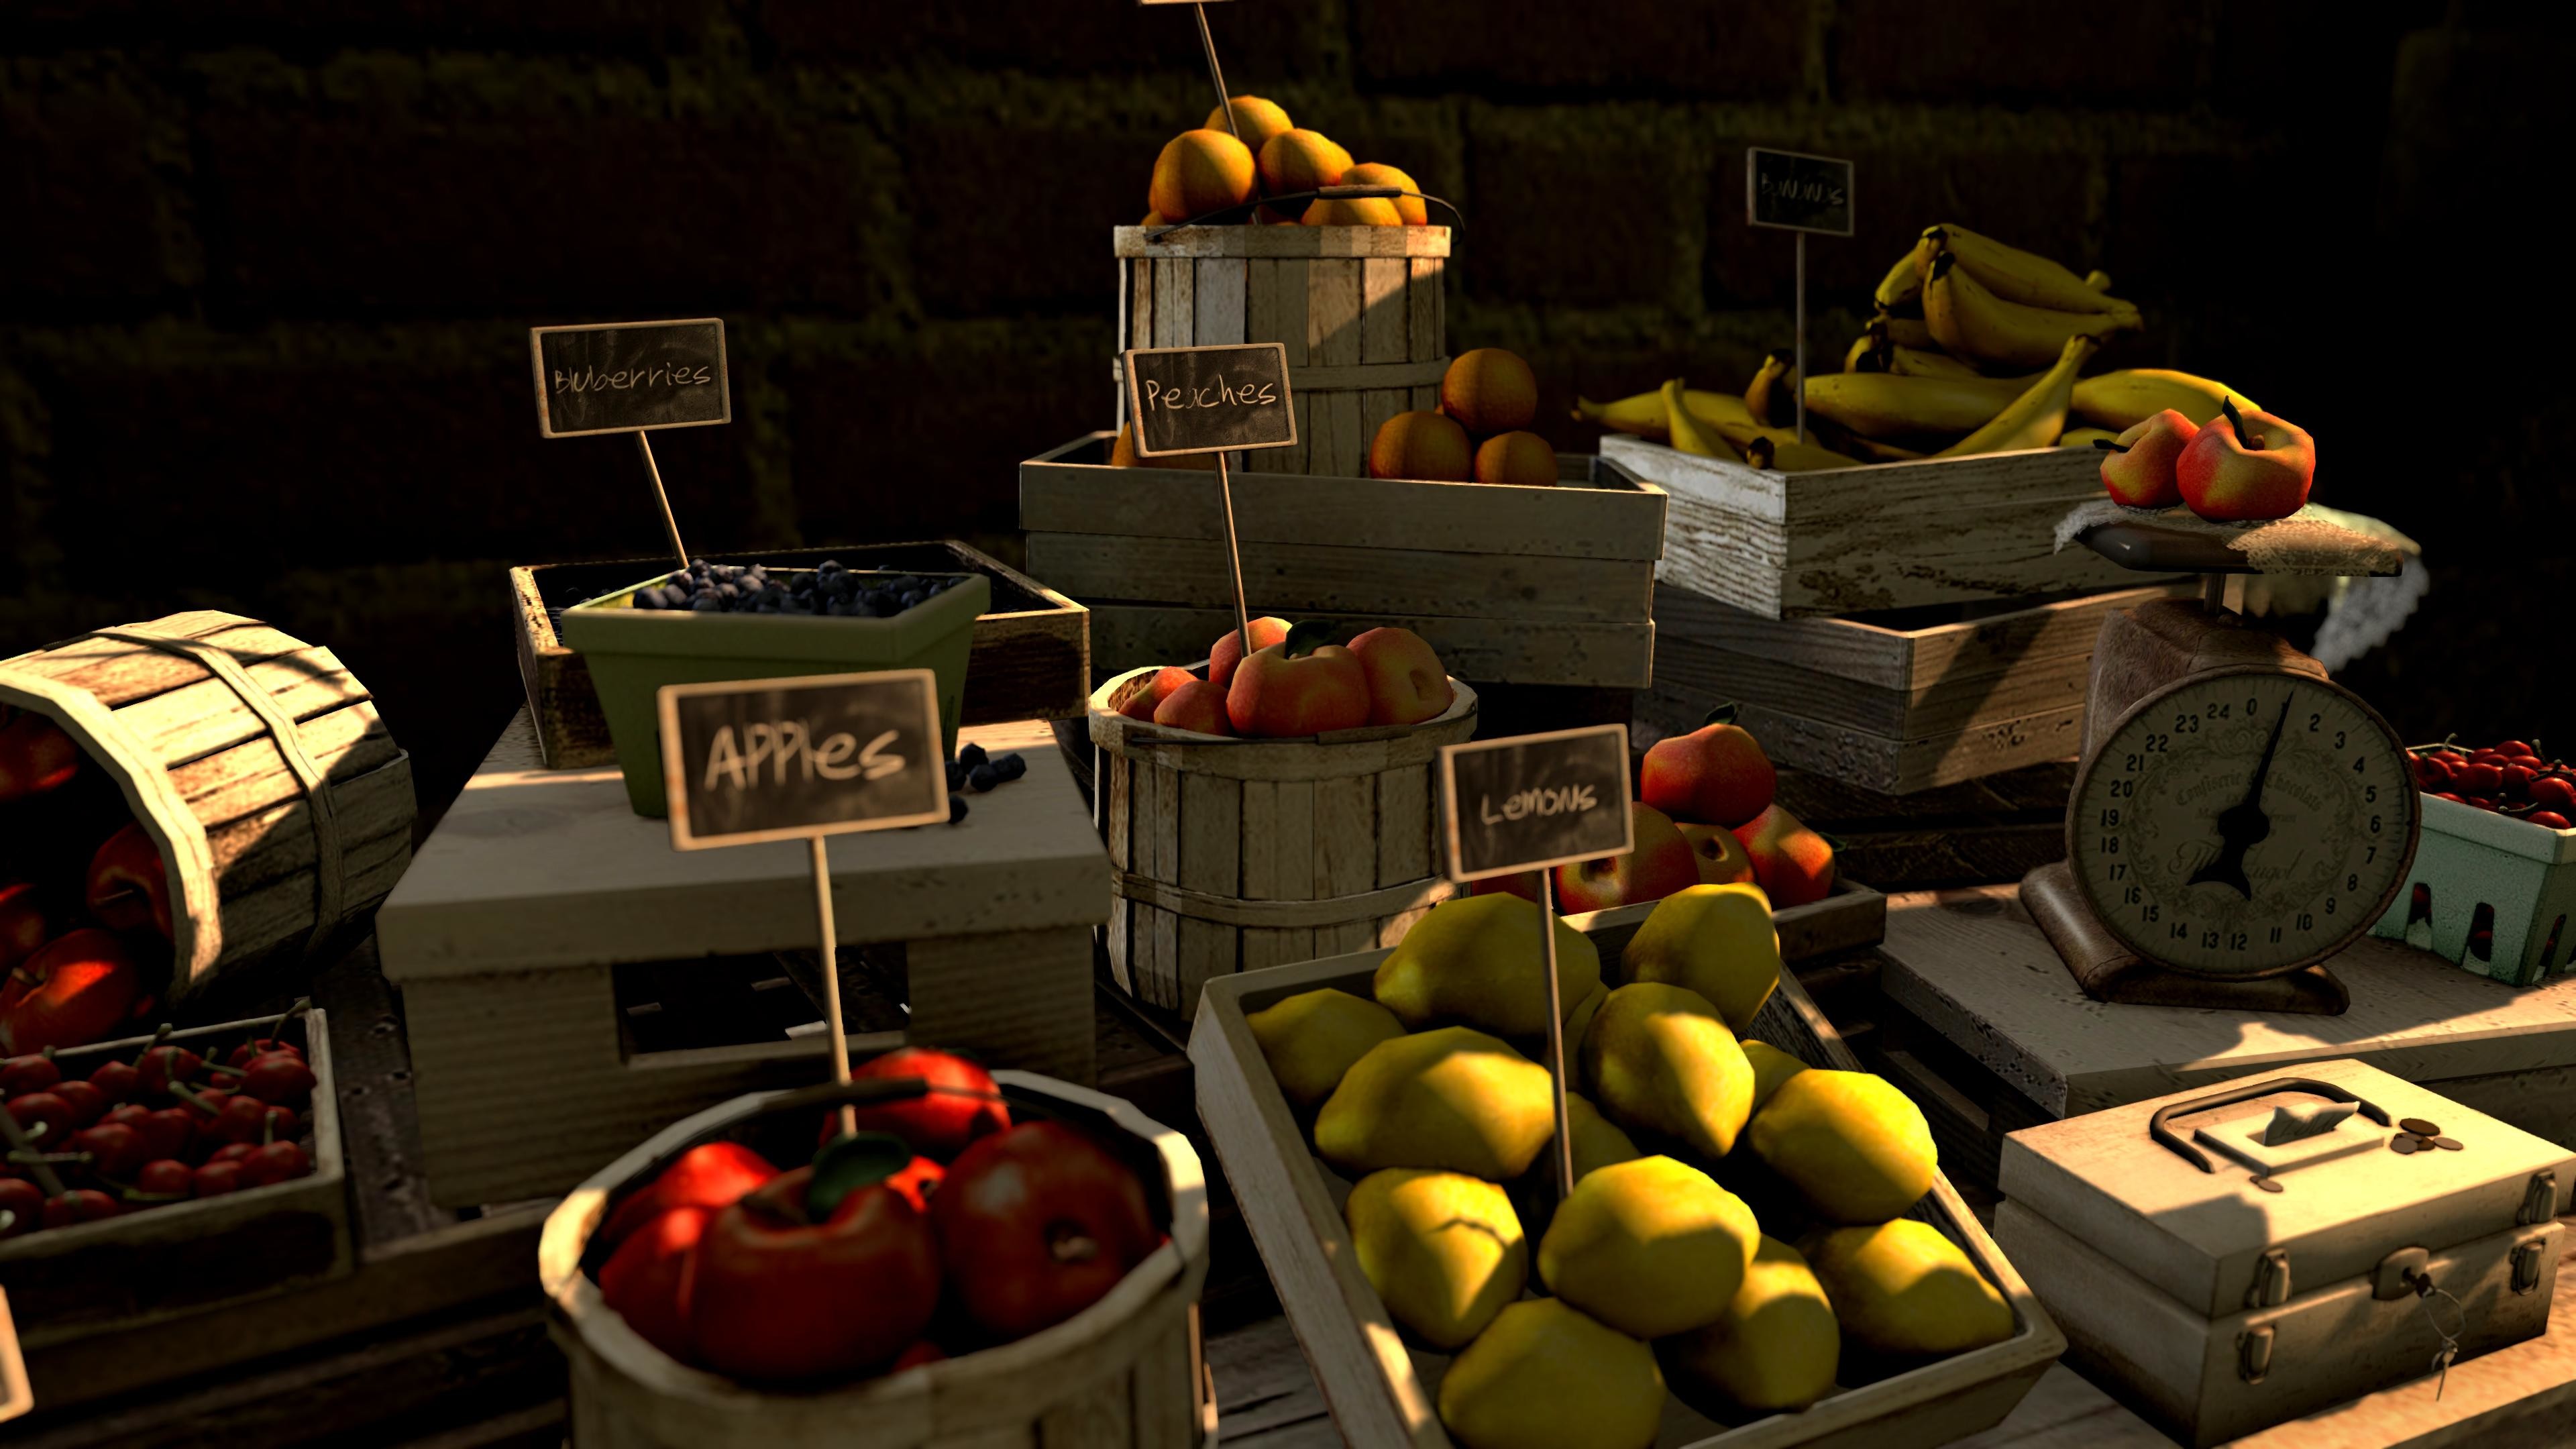 3840x2160 world signs money fruit computer square table wooden 3D graphics cherries  market stall tags lemons bananas